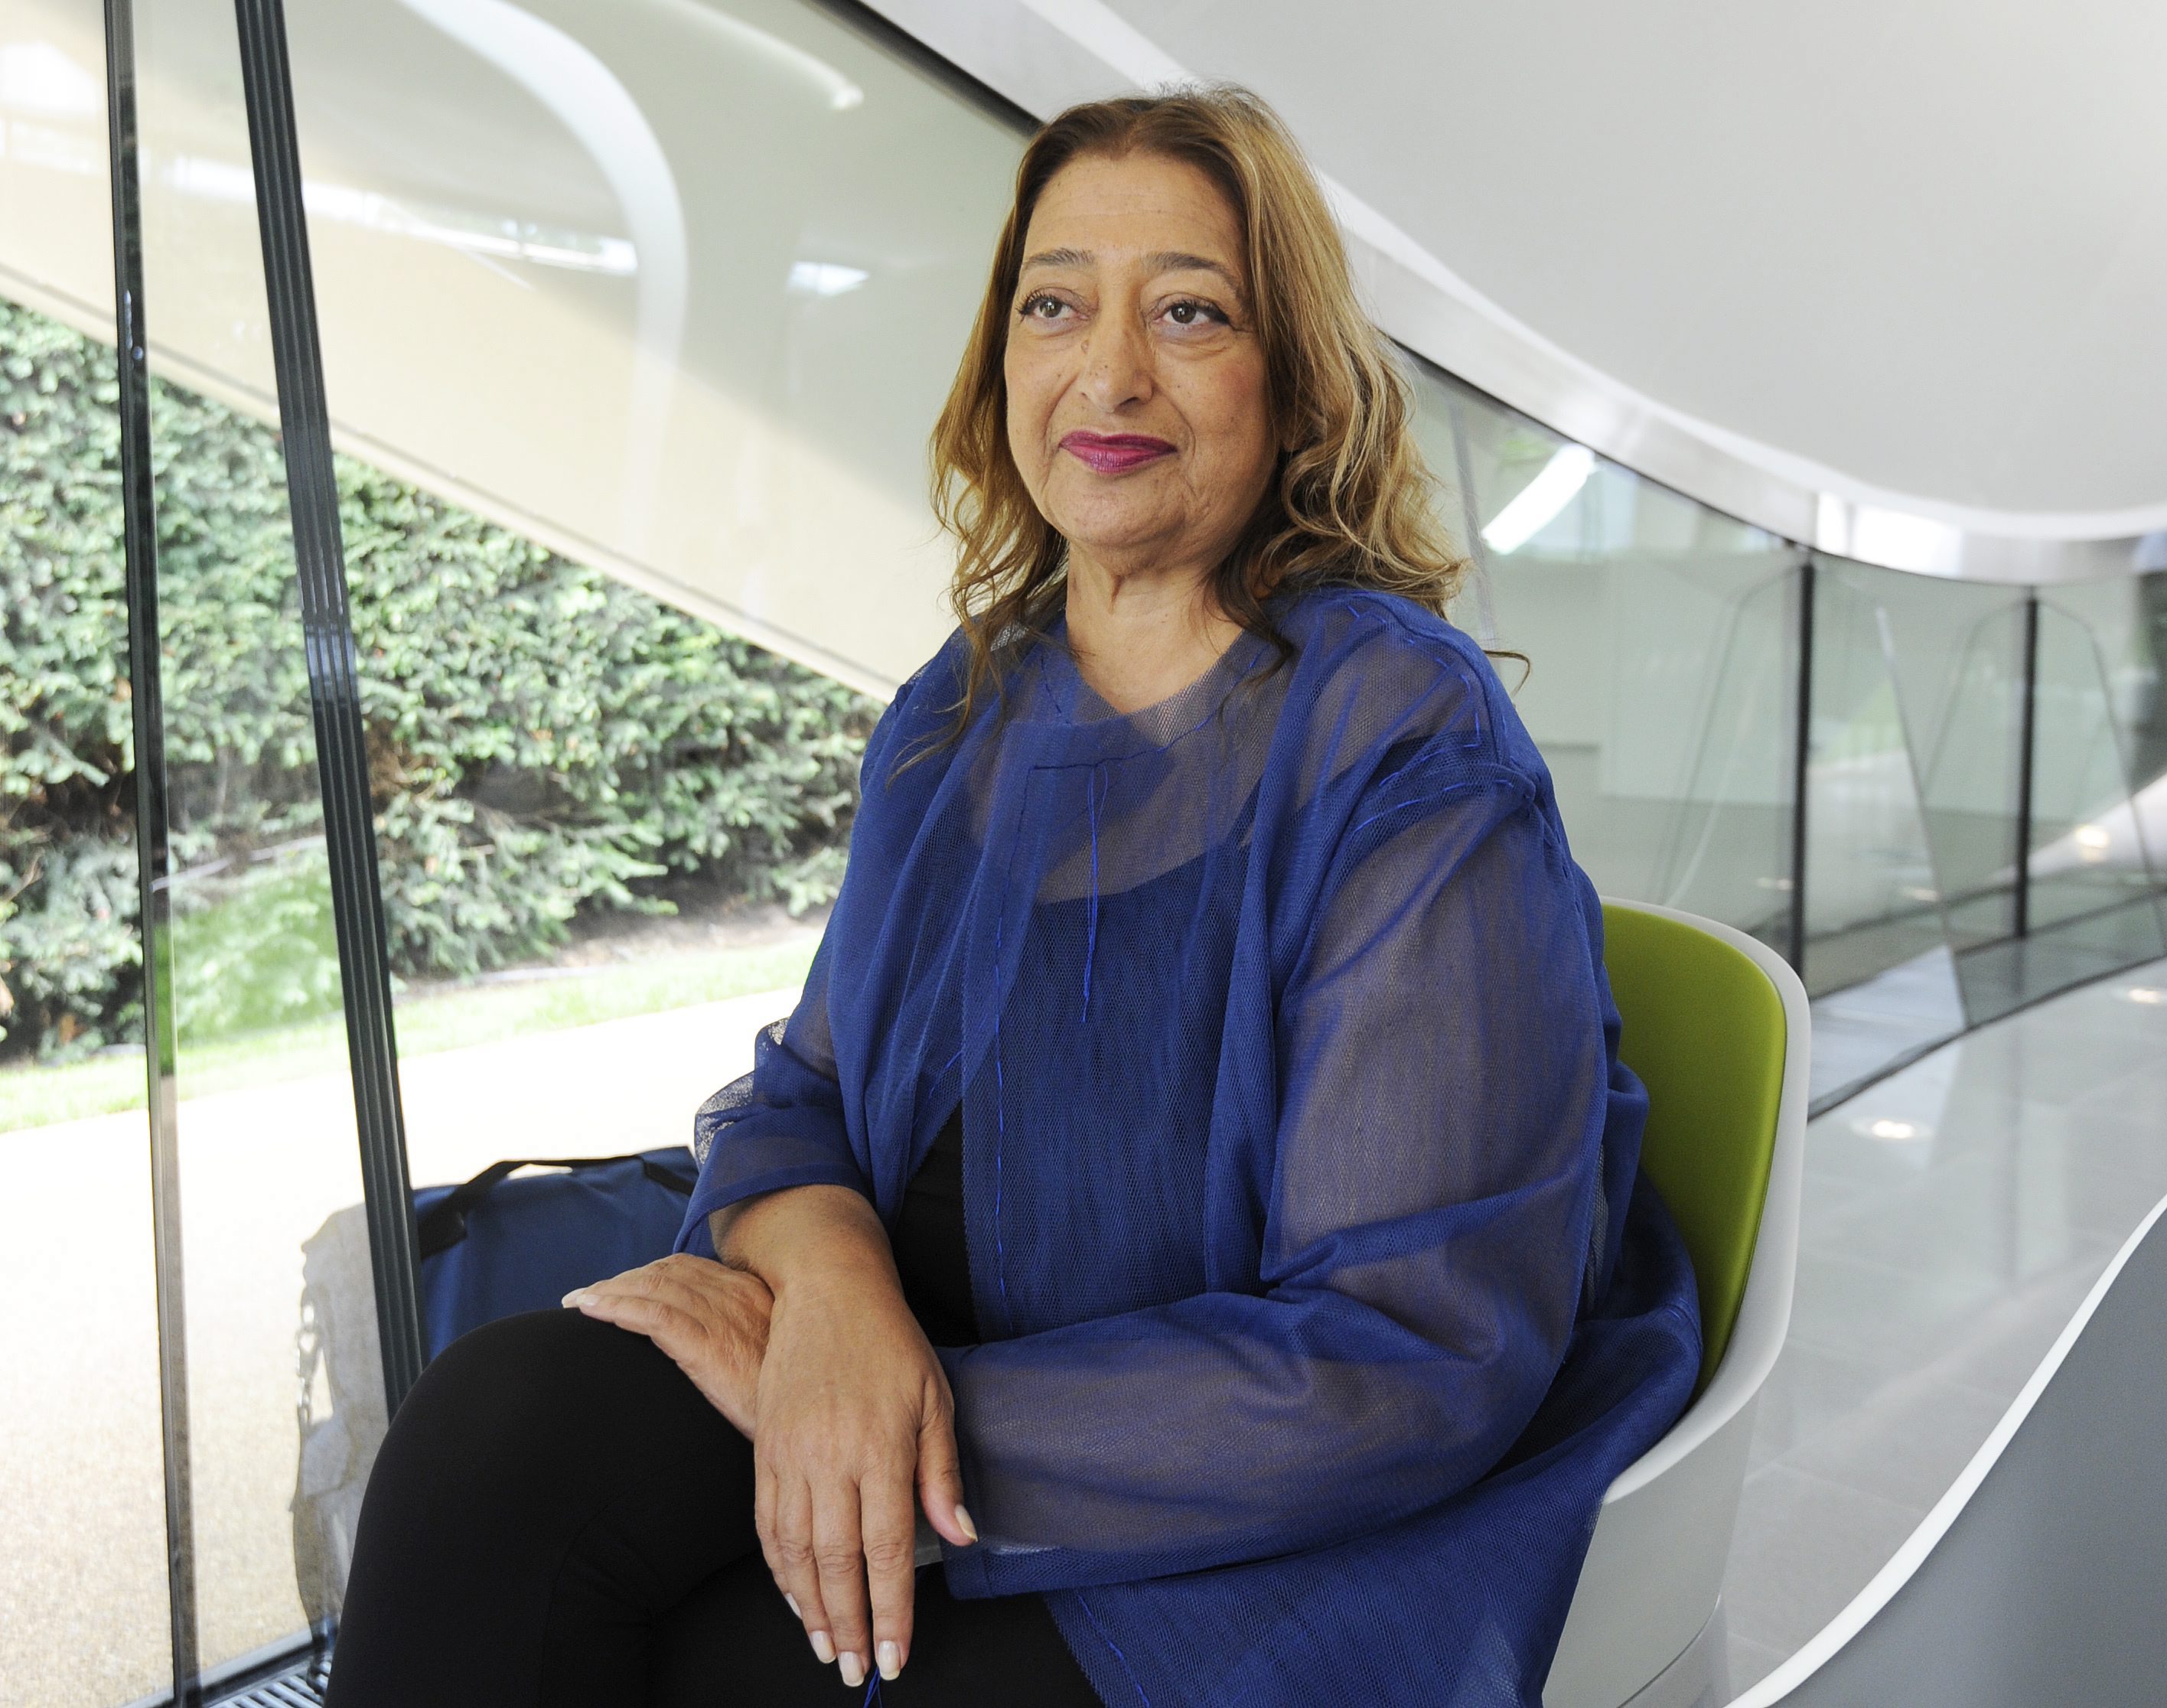 2013-09-25 13:14:09 epa03883207 Iraqi-British architect Zaha Hadid sits inside the newly constructed Serpentine Sackler Gallery during a television interview, in Kensington Gardens in London, Britain, 25 September2013. The renovation of the former 1805 gunpowder store was designed by Zaha Hadid Architects. EPA/FACUNDO ARRIZABALAGA